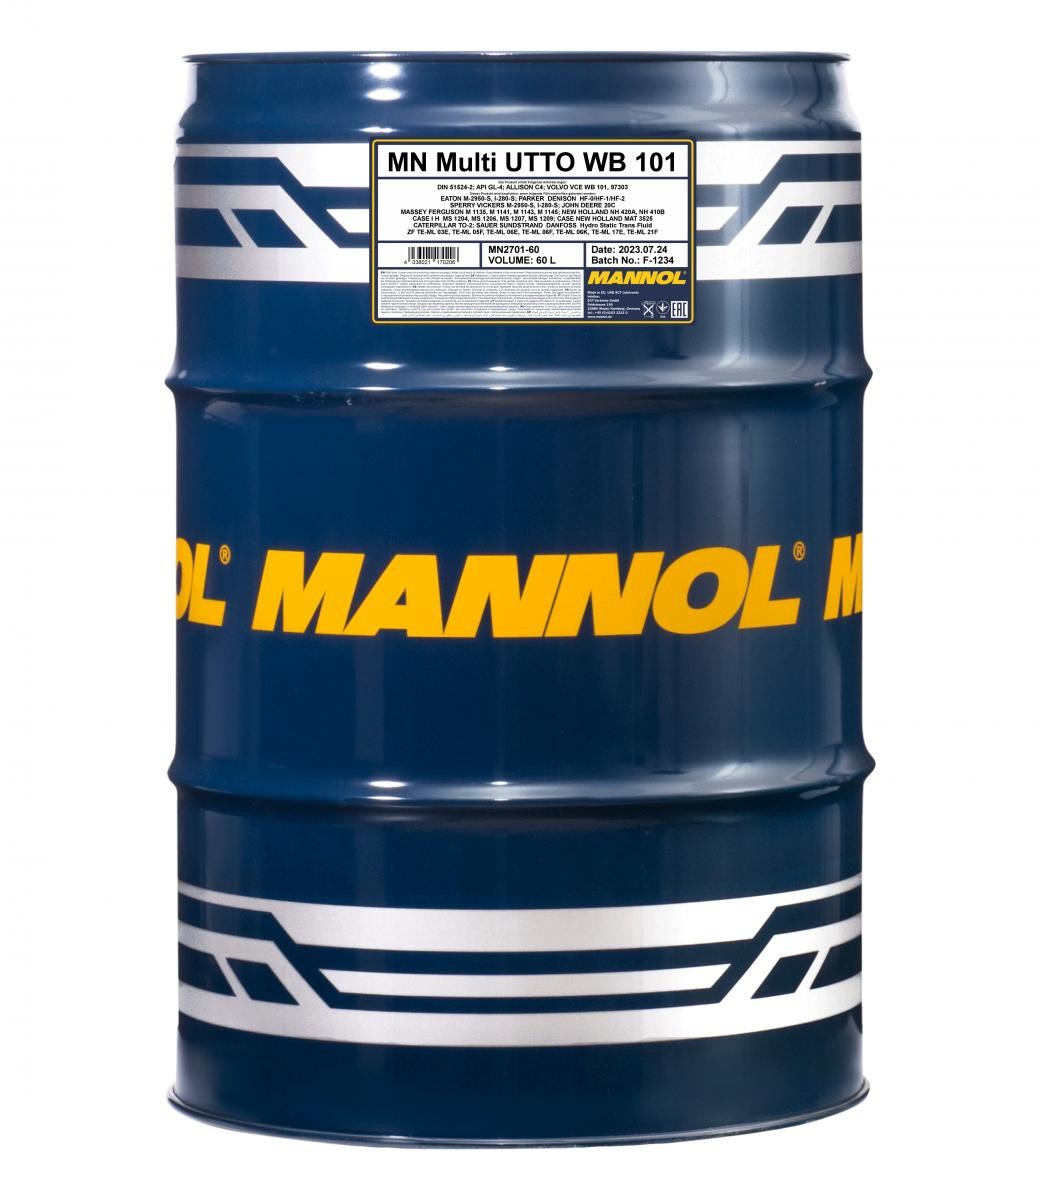 MANNOL Multi UTTO WB 101 MN2701-60 Transmission fluid Mineral Oil, Capacity: 60l